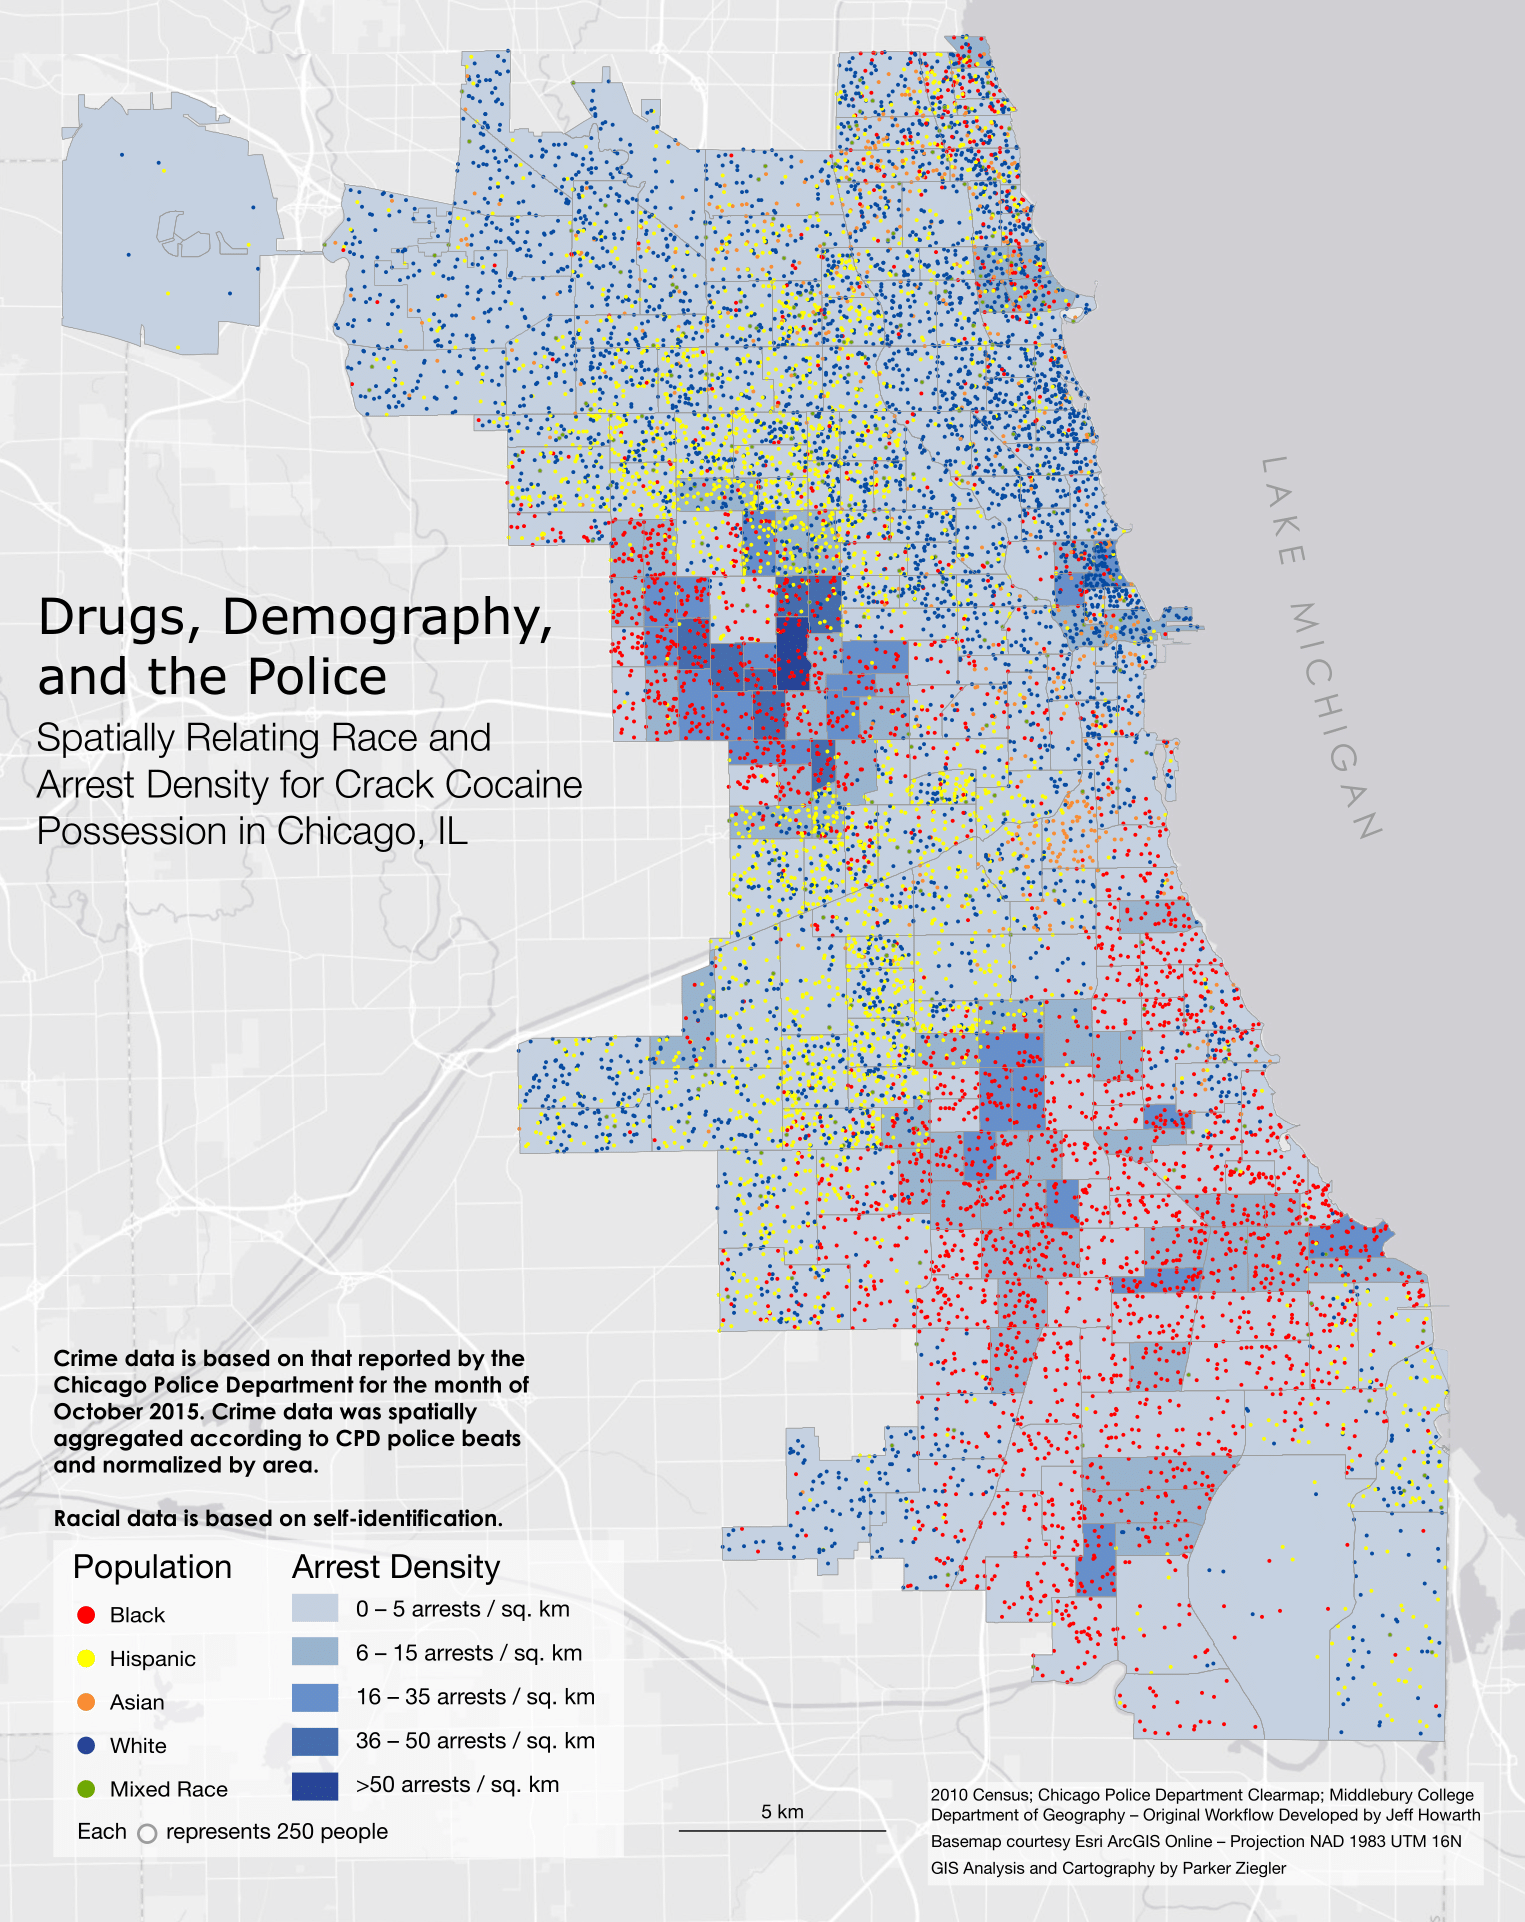 A map examining the spatial correlations between non-violent drug arrests and race in Chicago.